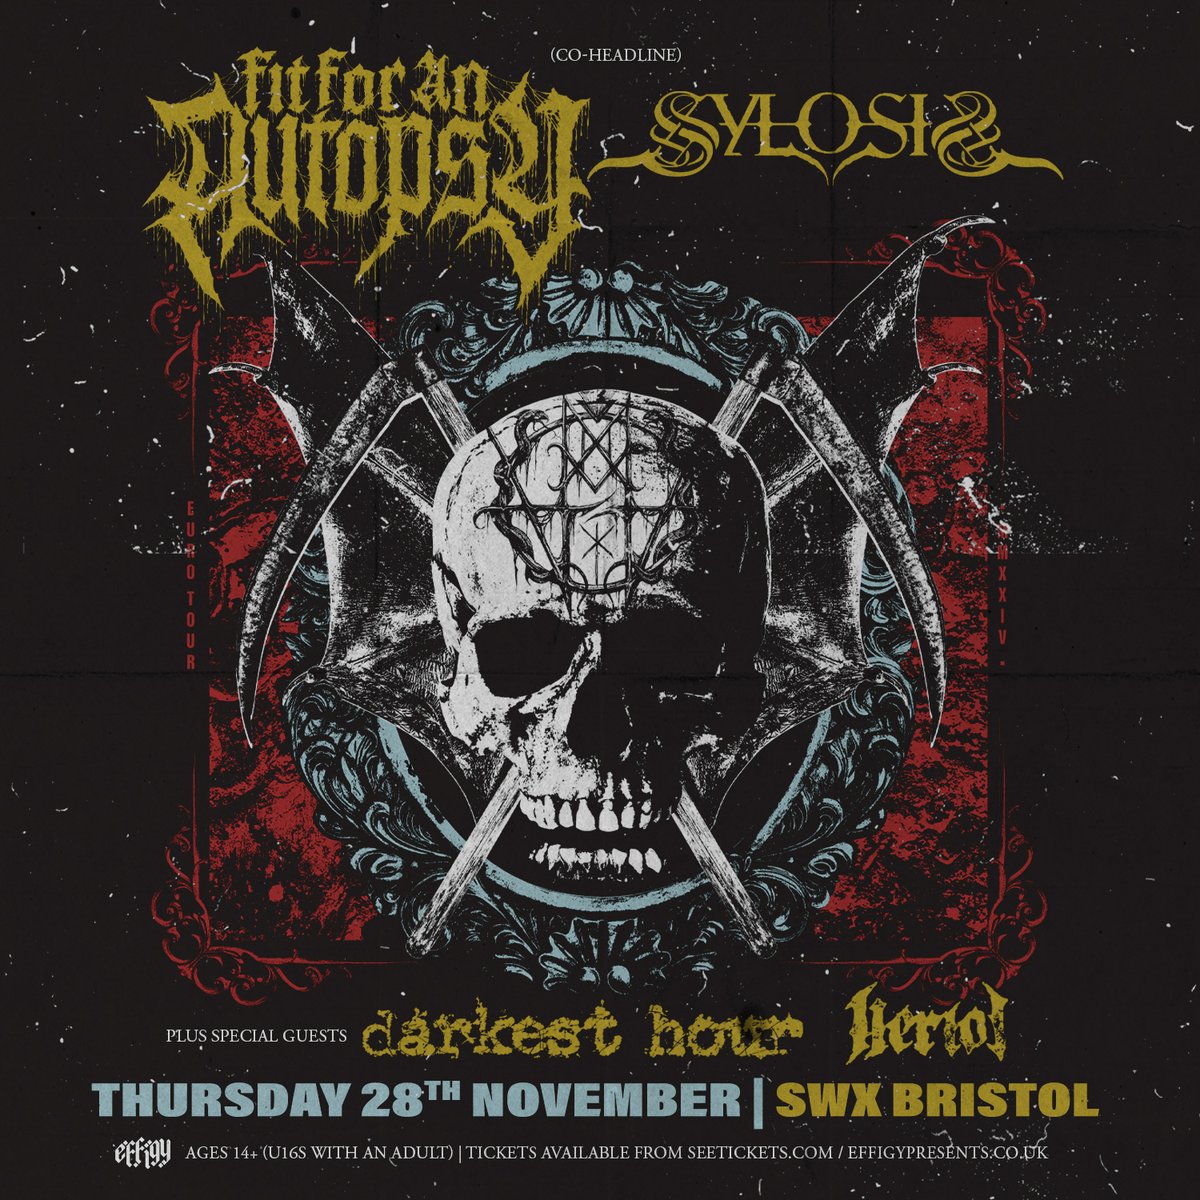 Stacked co-headed agenda announce with @fitforanautopsy & @Sylosis with support from @darkesthourrock & @heriotmetal. Slated for November 28th, tickets go live Monday at 10am via @TicketWebUK. Set reminder💀 #SWX #Live #CoHeader #FitForAnAutopsy #Sylosis